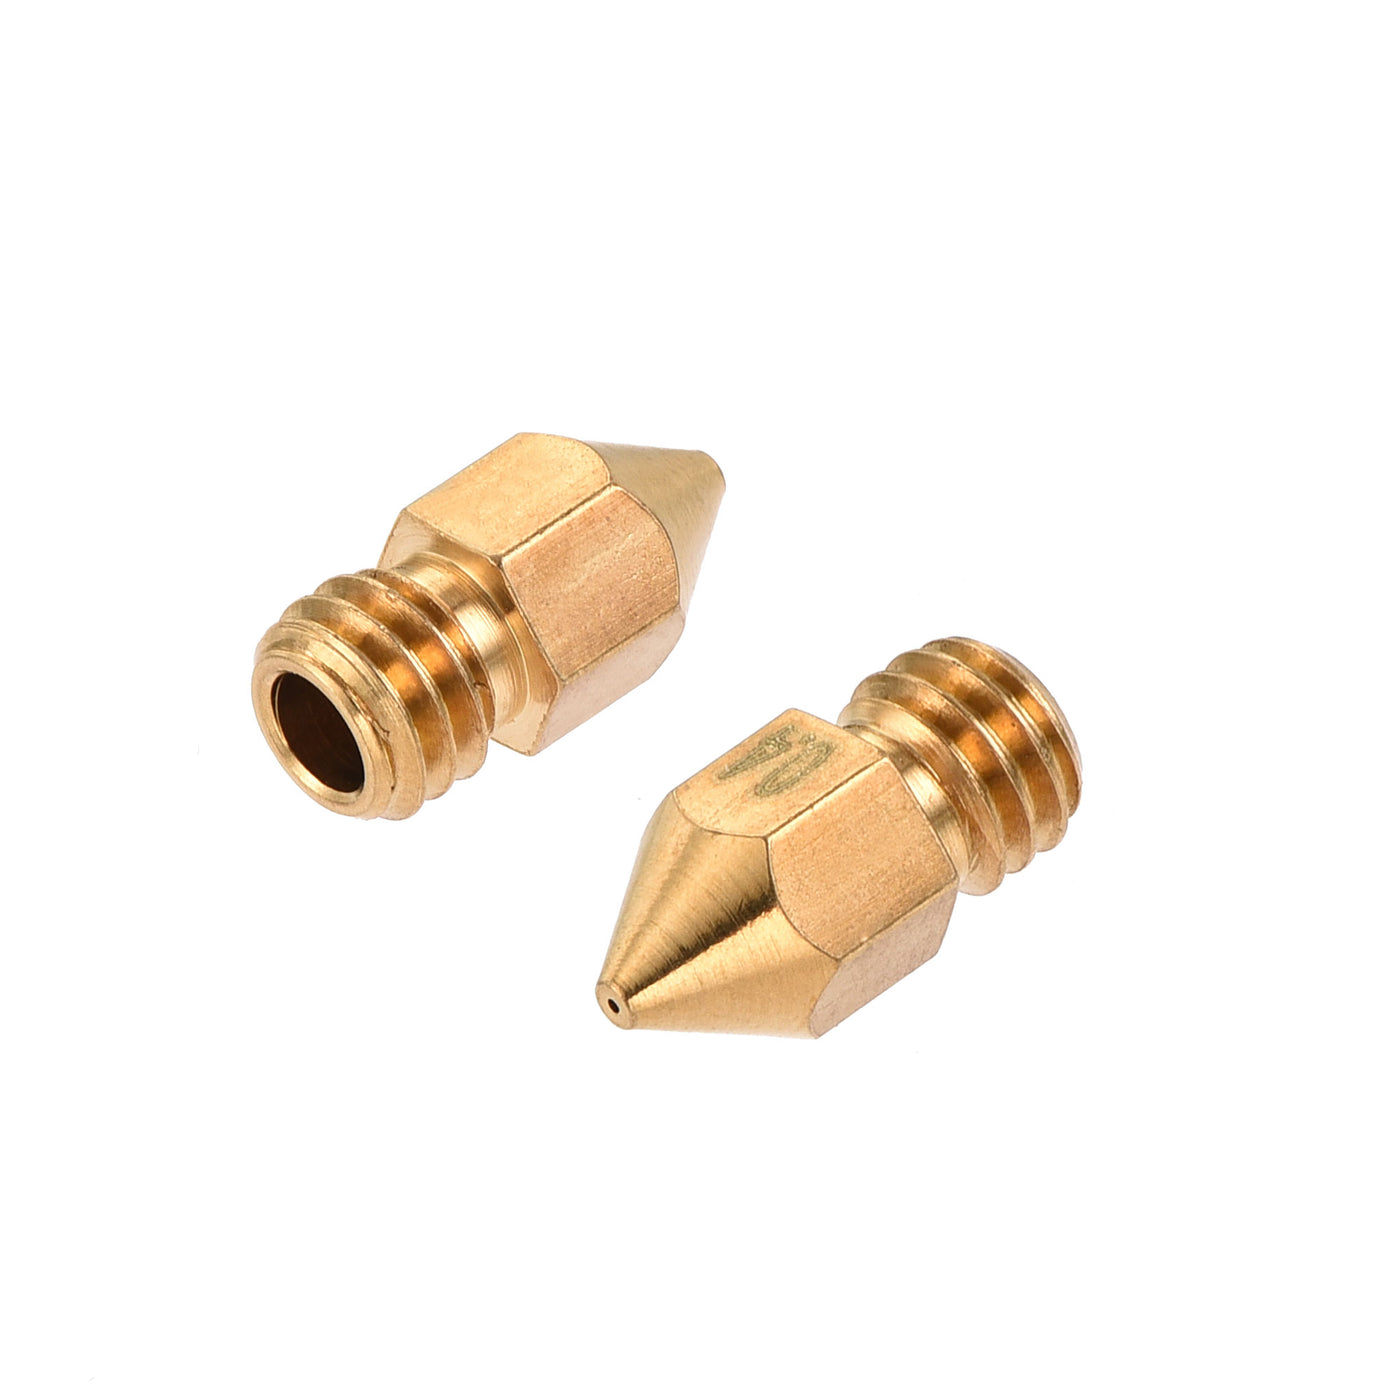 uxcell Uxcell 0.4mm 3D Printer Nozzle, 24pcs M6 Thread for MK8 3mm Extruder Print, Brass